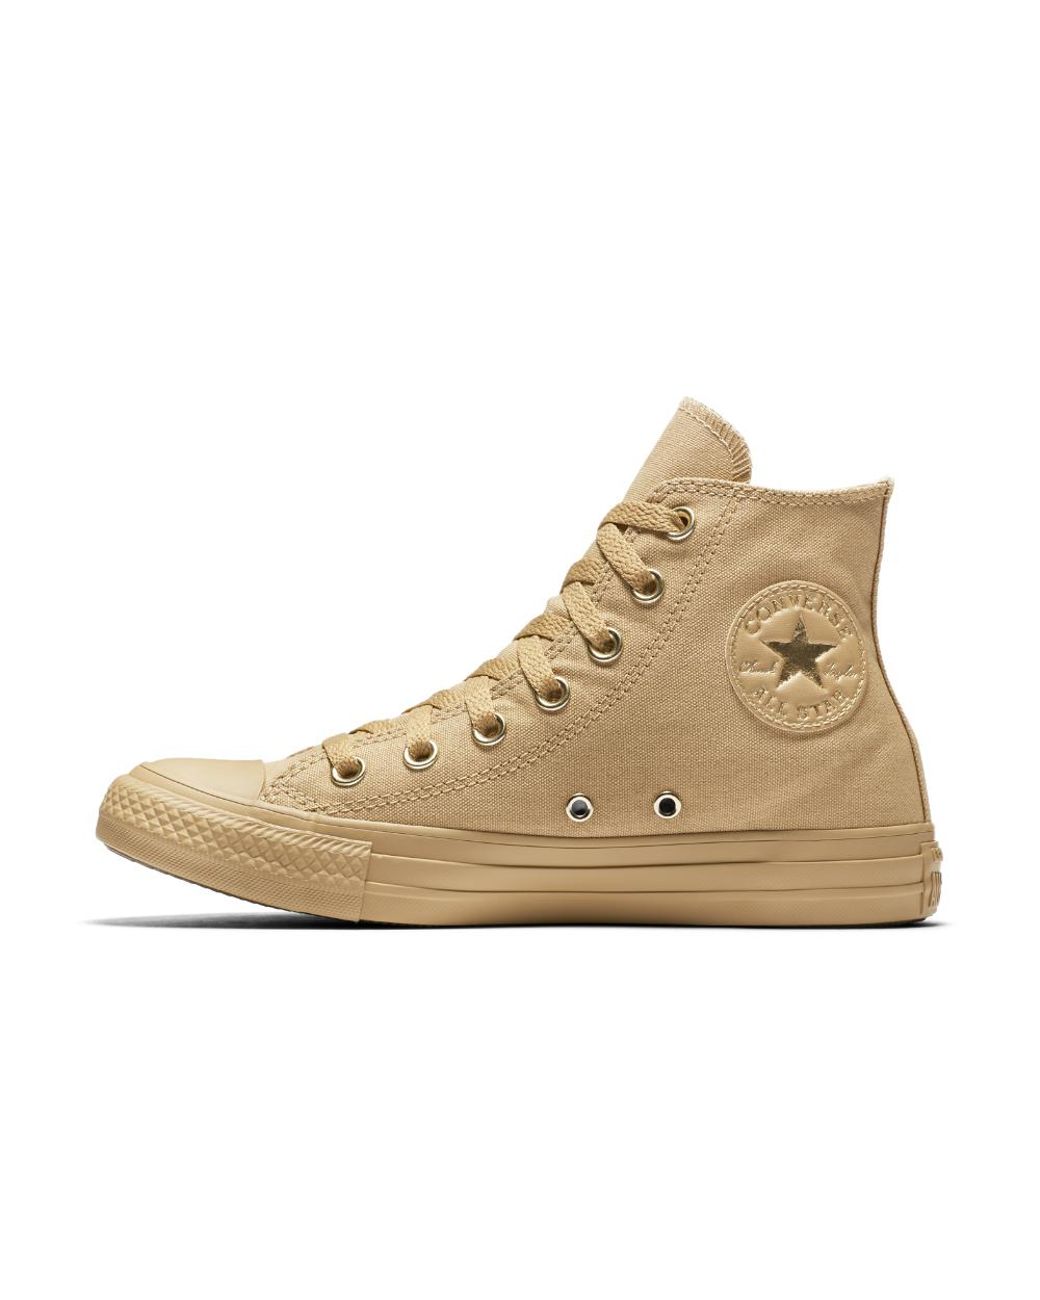 Converse Chuck Taylor All Star Mono Glam High Top Women's Shoe in Brown |  Lyst